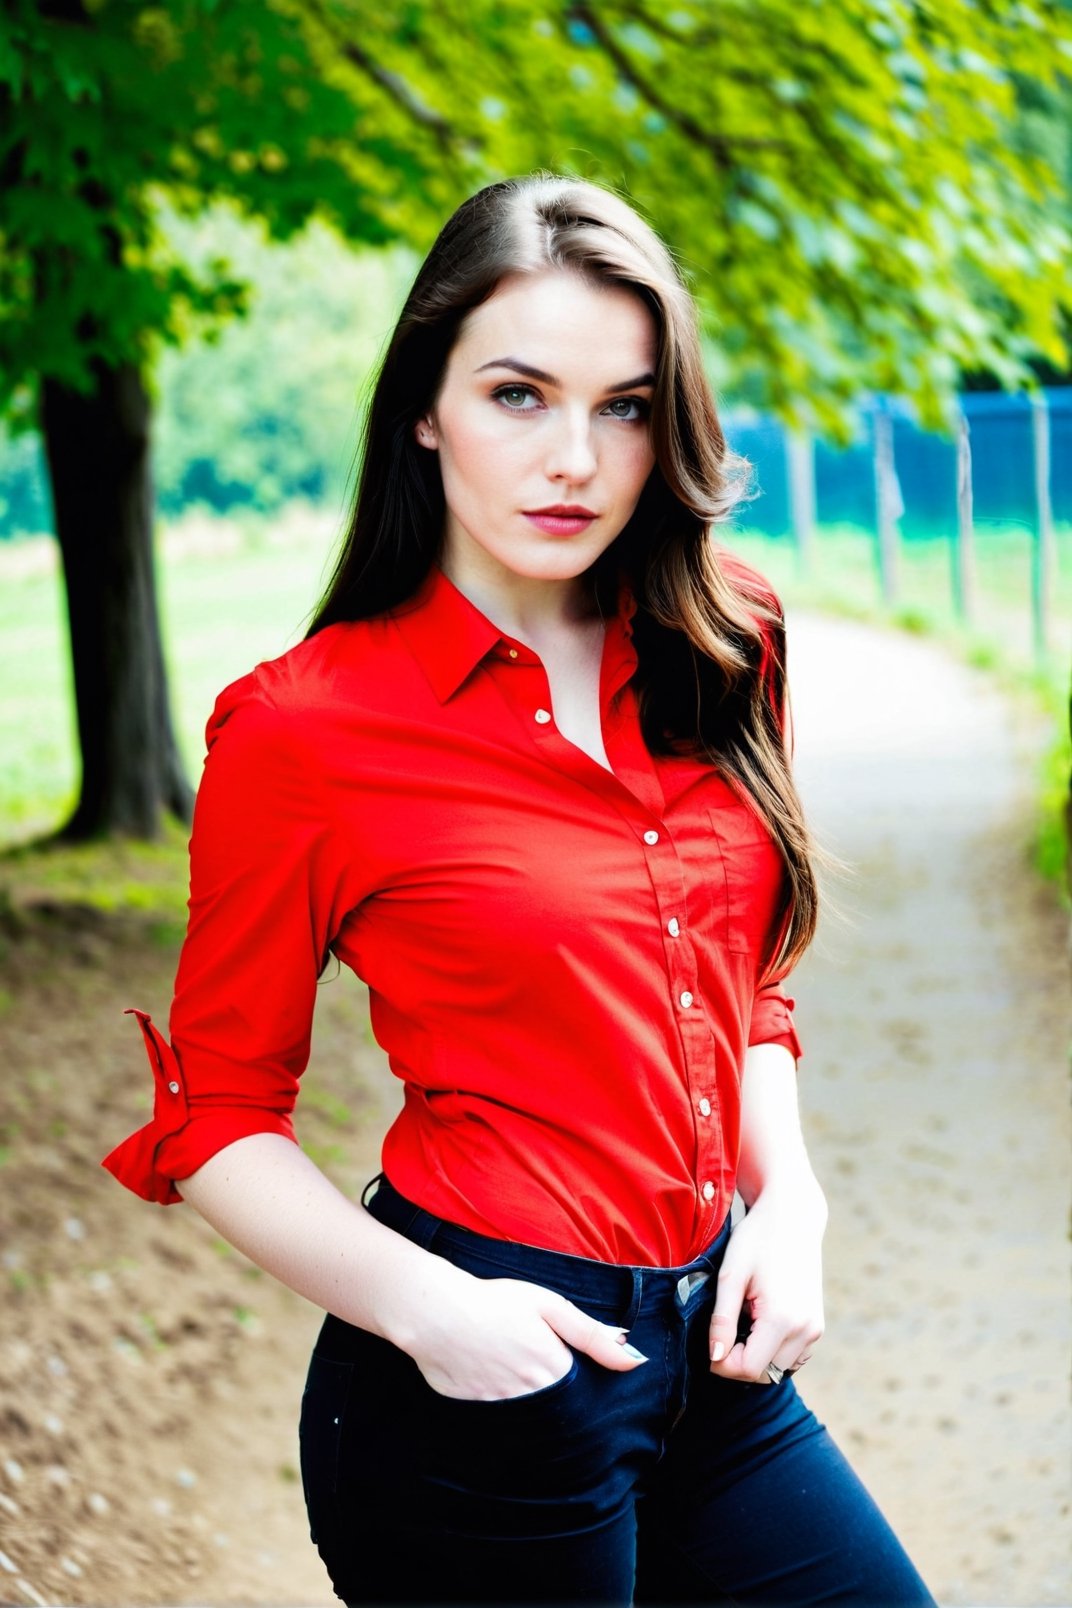 curvy slim young beautiful 16 years old teen, beauful red shirt, perfect shirt, europen look, pale skin, outdoor,photo, at day 